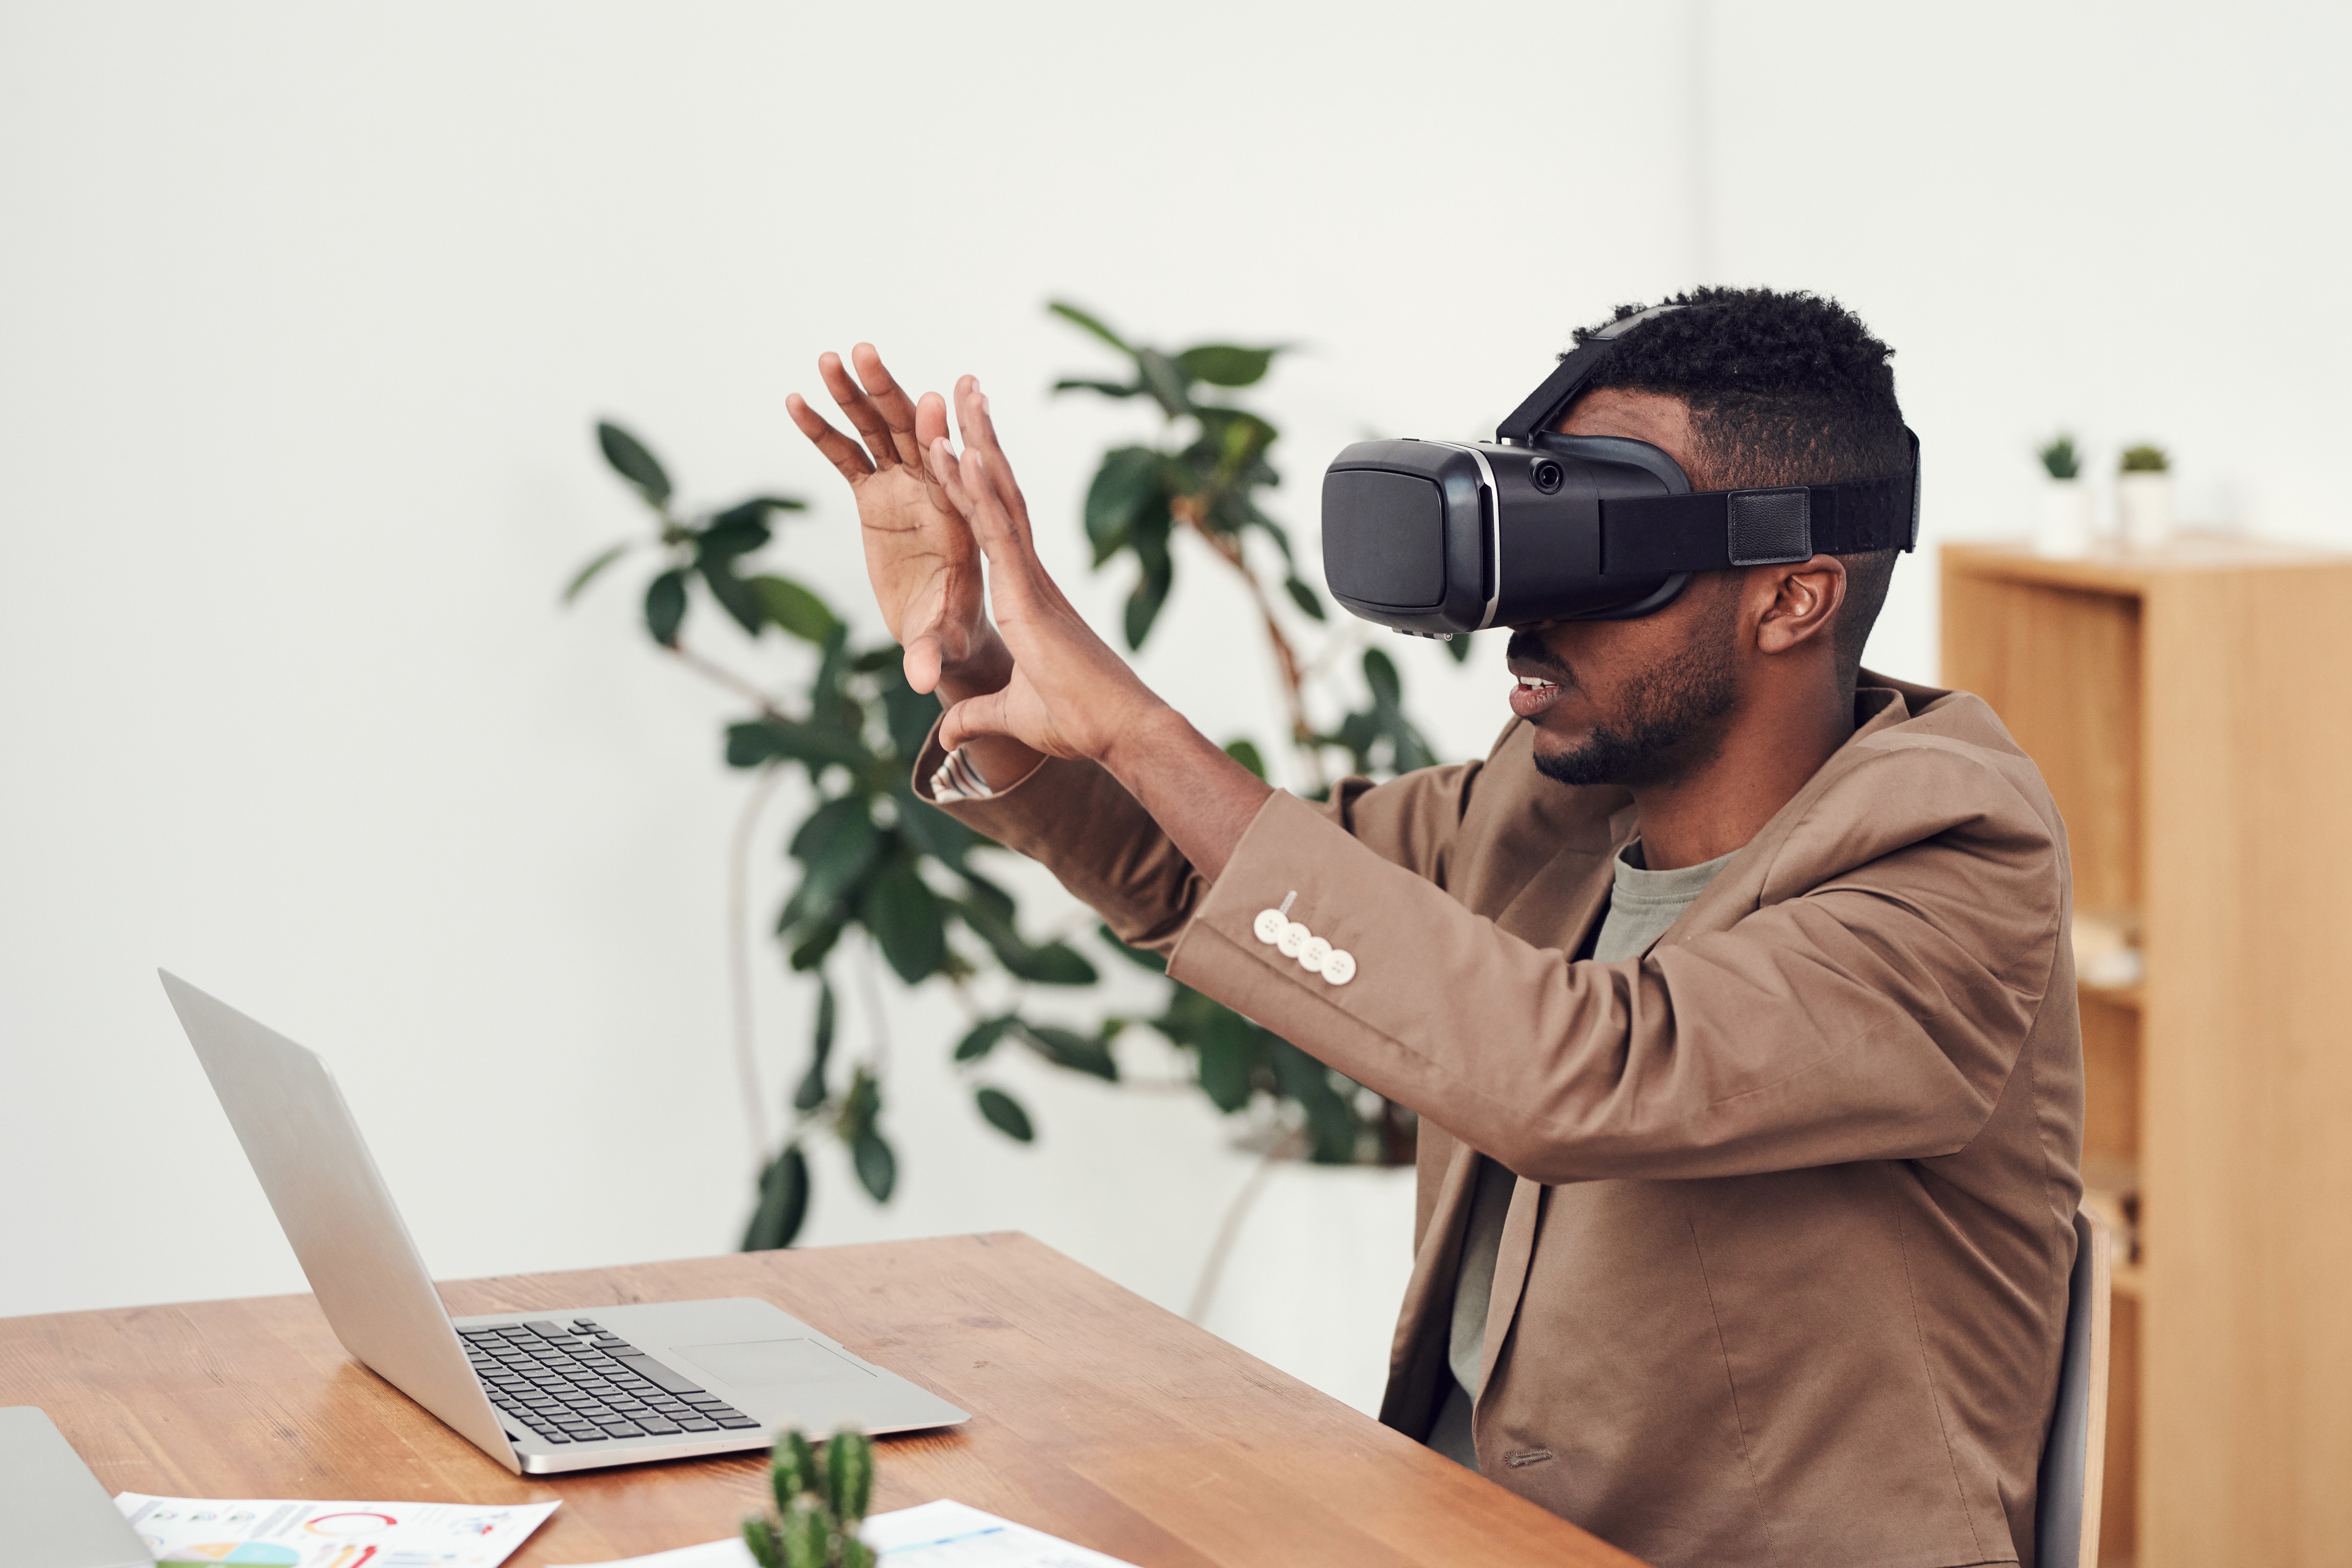 What Are 3 Uses for Virtual Reality?